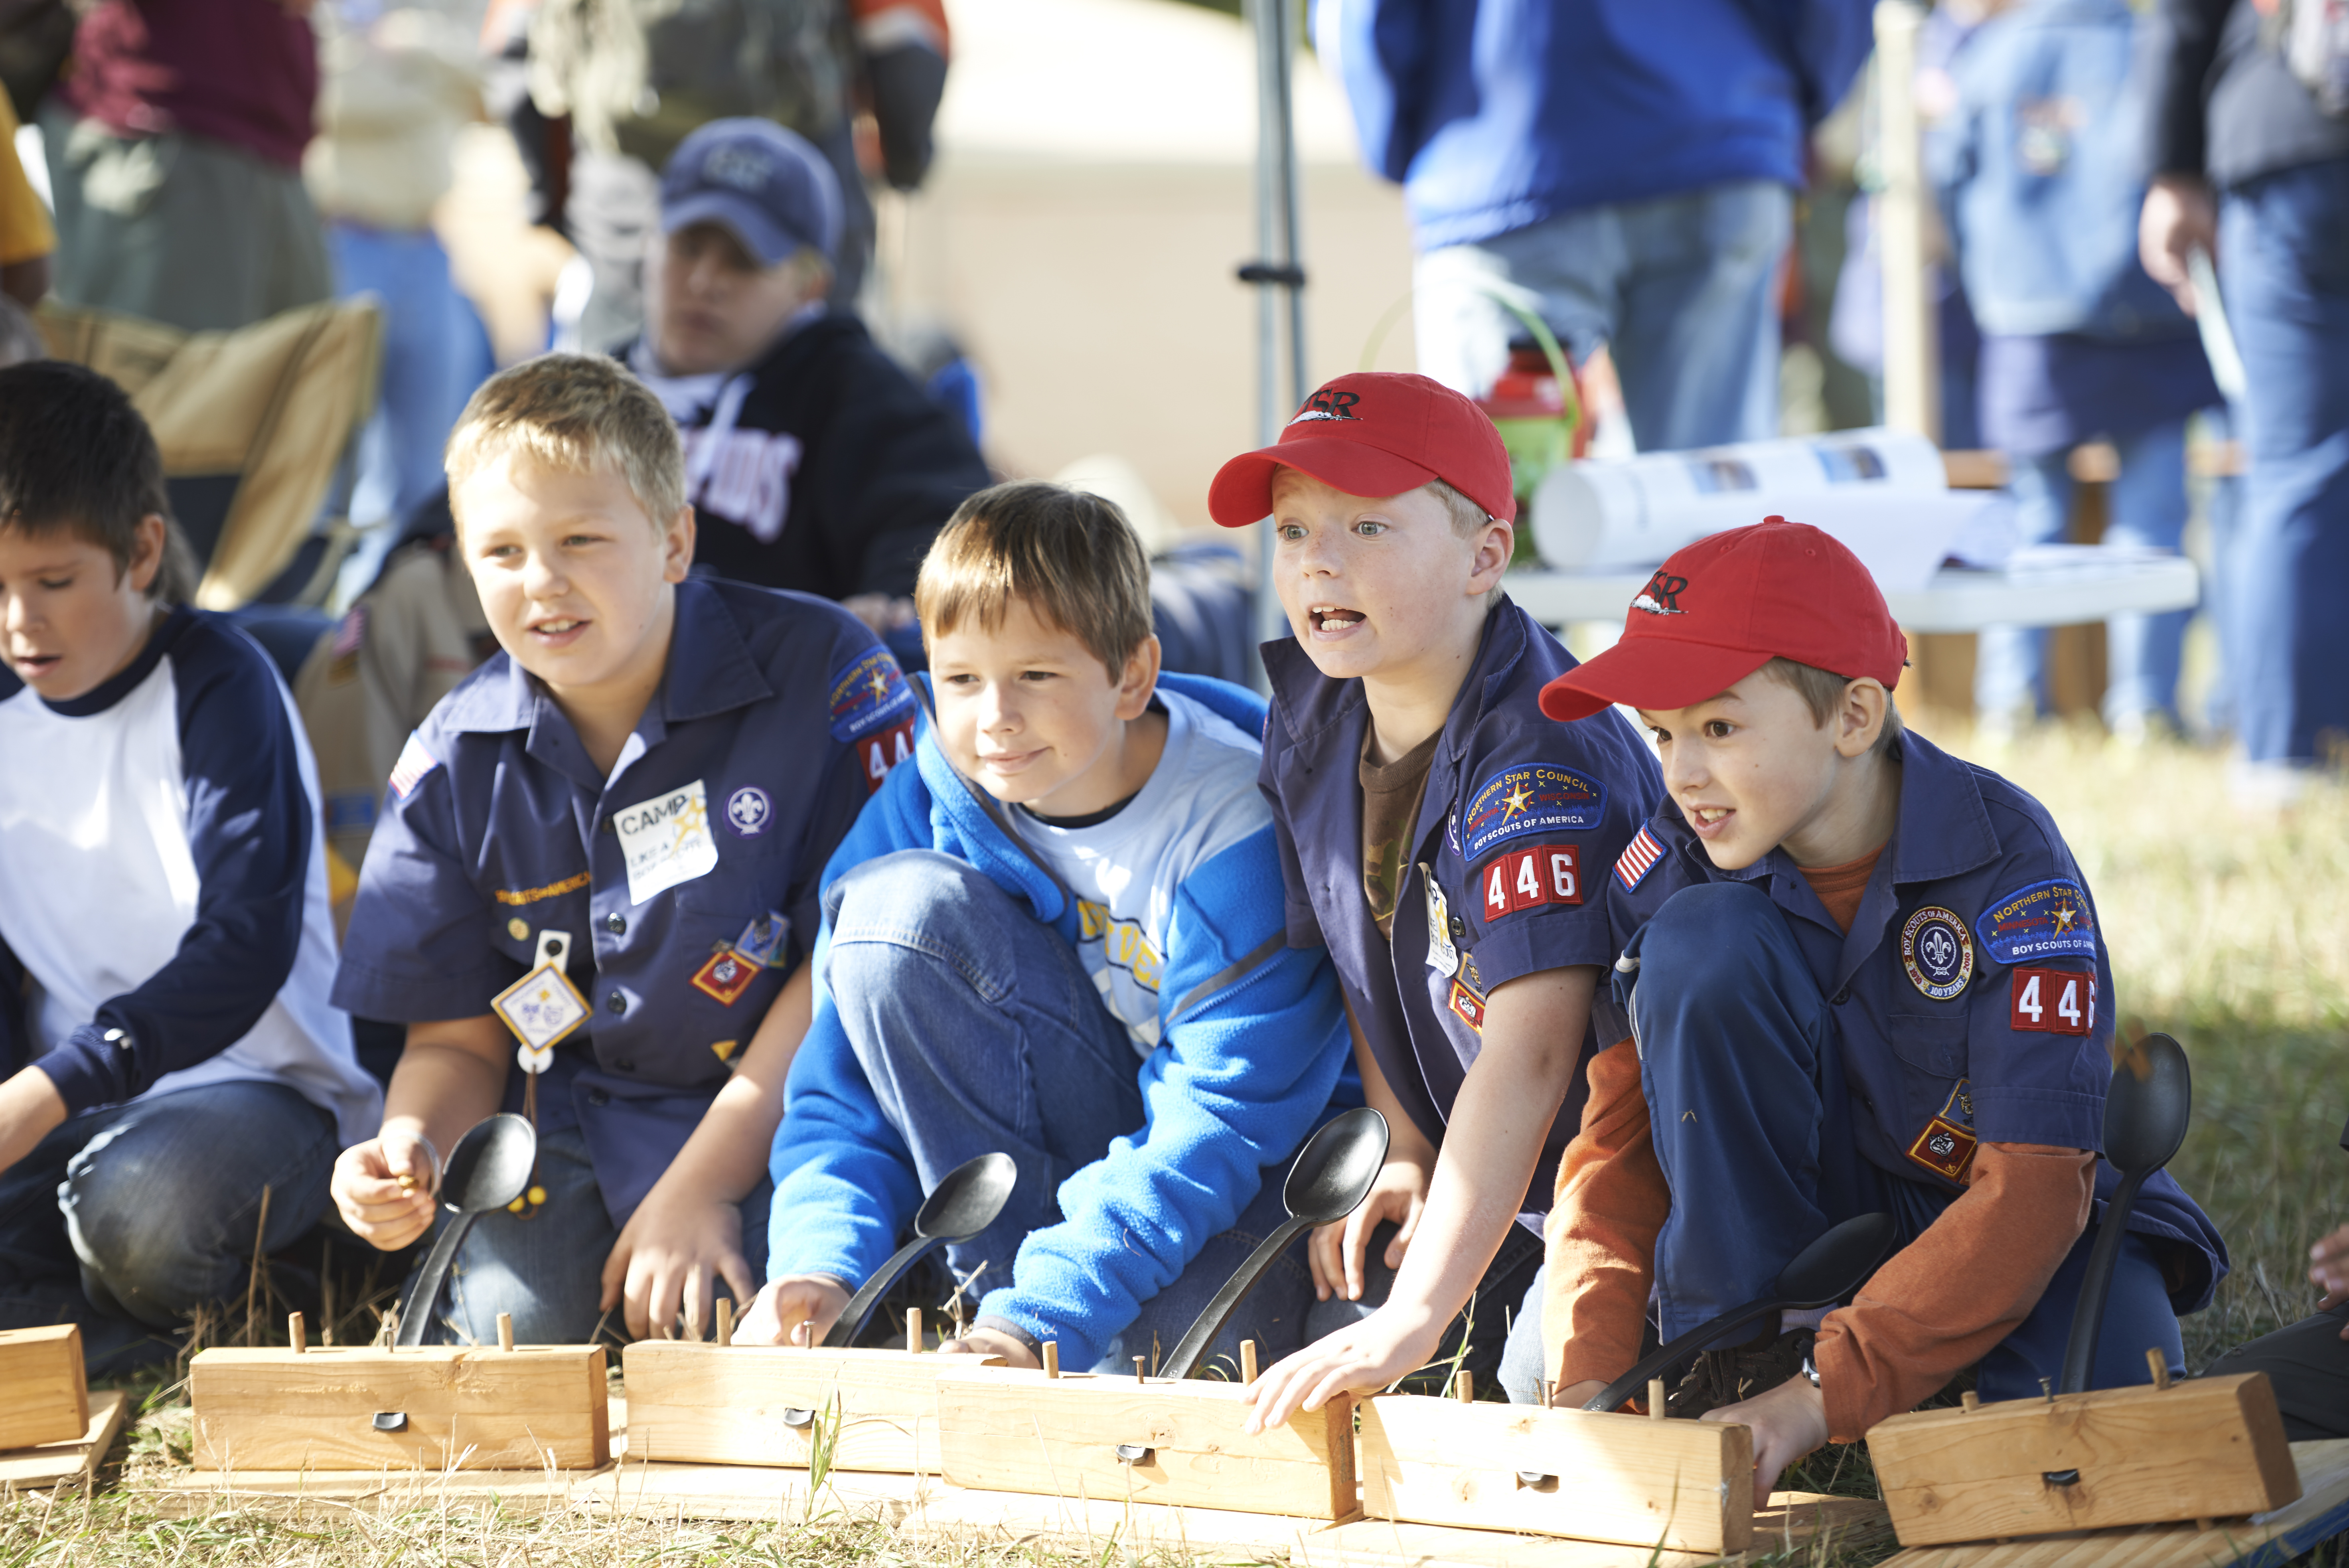 Group of Cub Scouts dressed in uniform watching an activity happen off camera